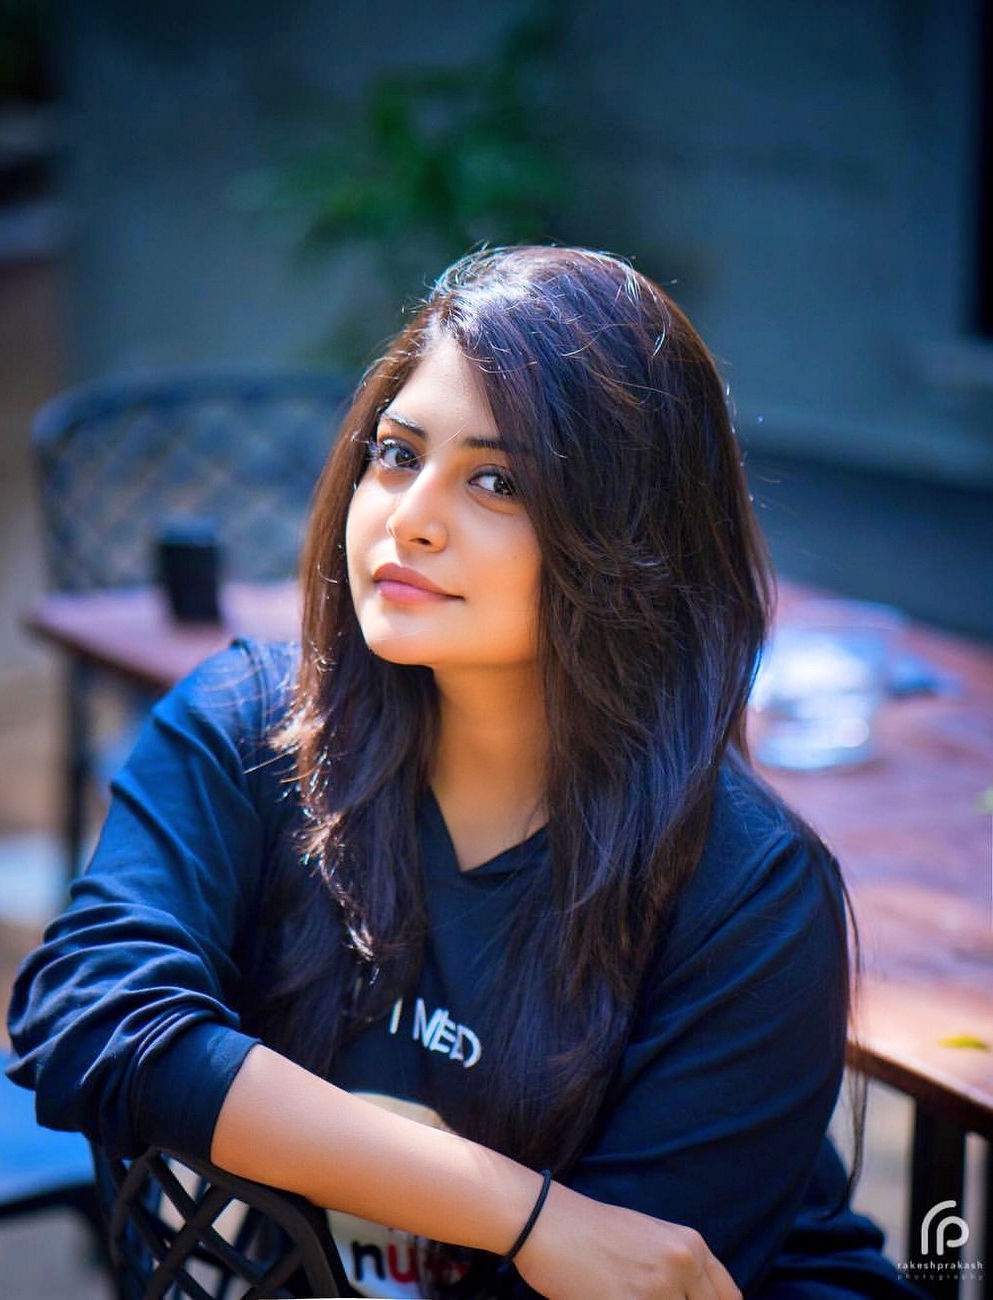 manjima-mohan-images-gallery-093-240